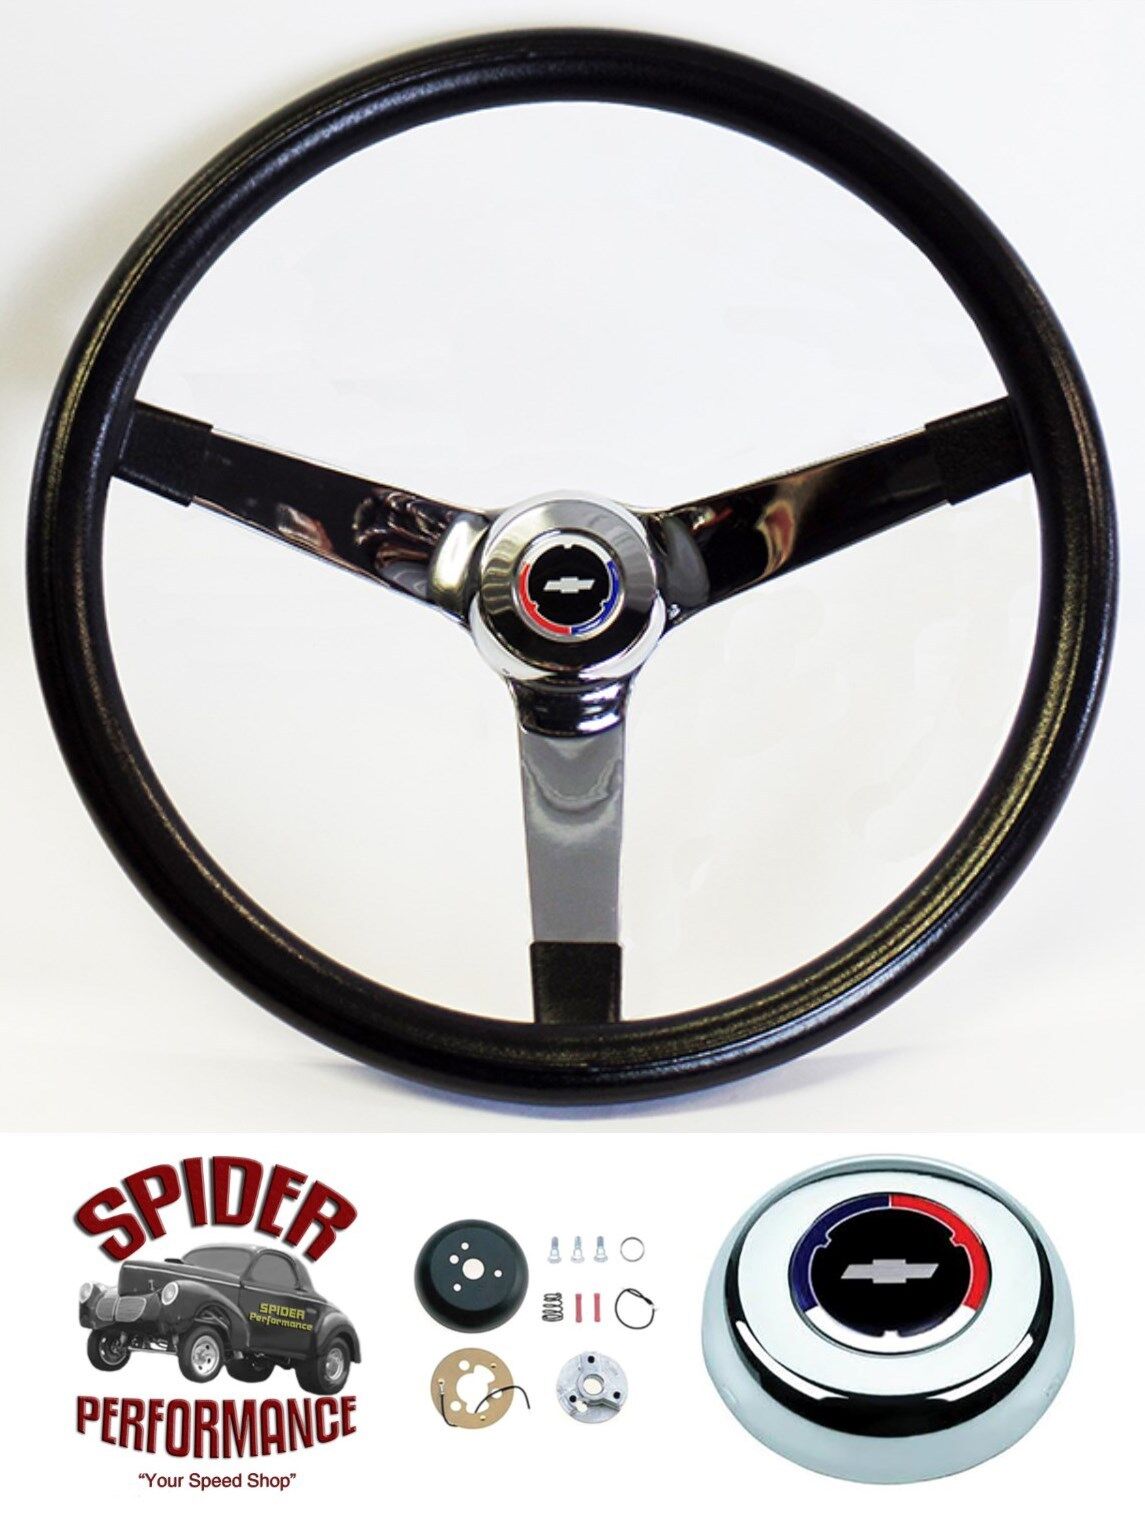 61-63 Biscayne Impala steering wheel Red White Blue Bow 14 3/4